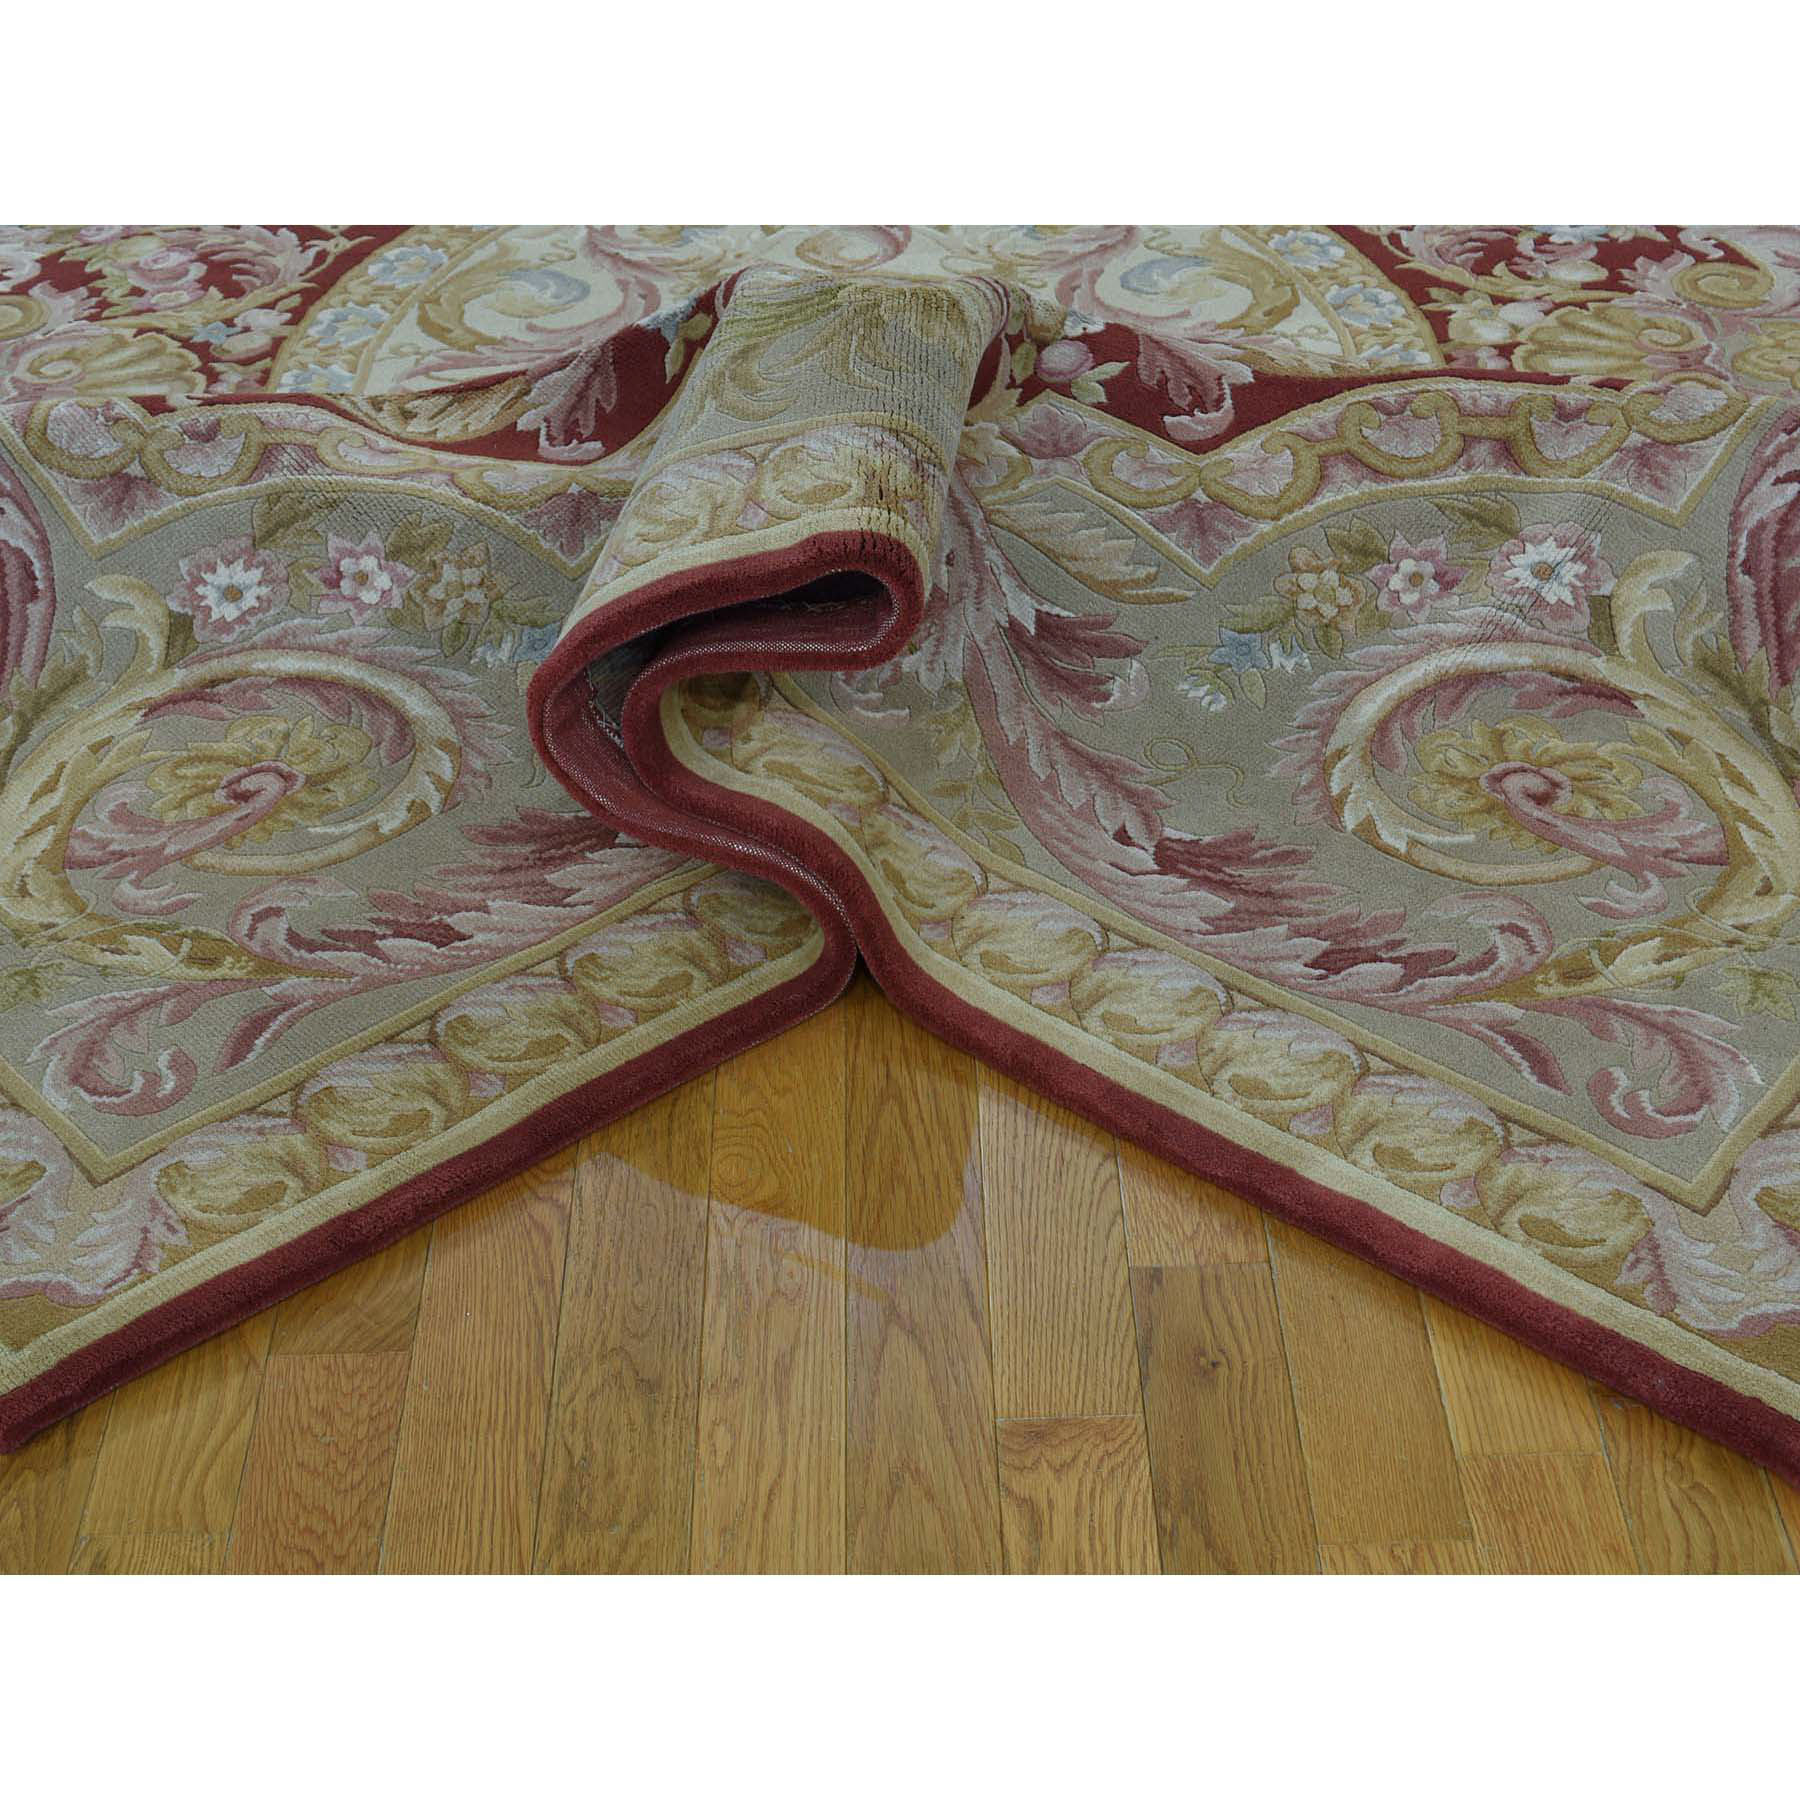 8-9 x11-9  Savonnerie Hand-Knotted Thick And Plush Napoleon III Rug 